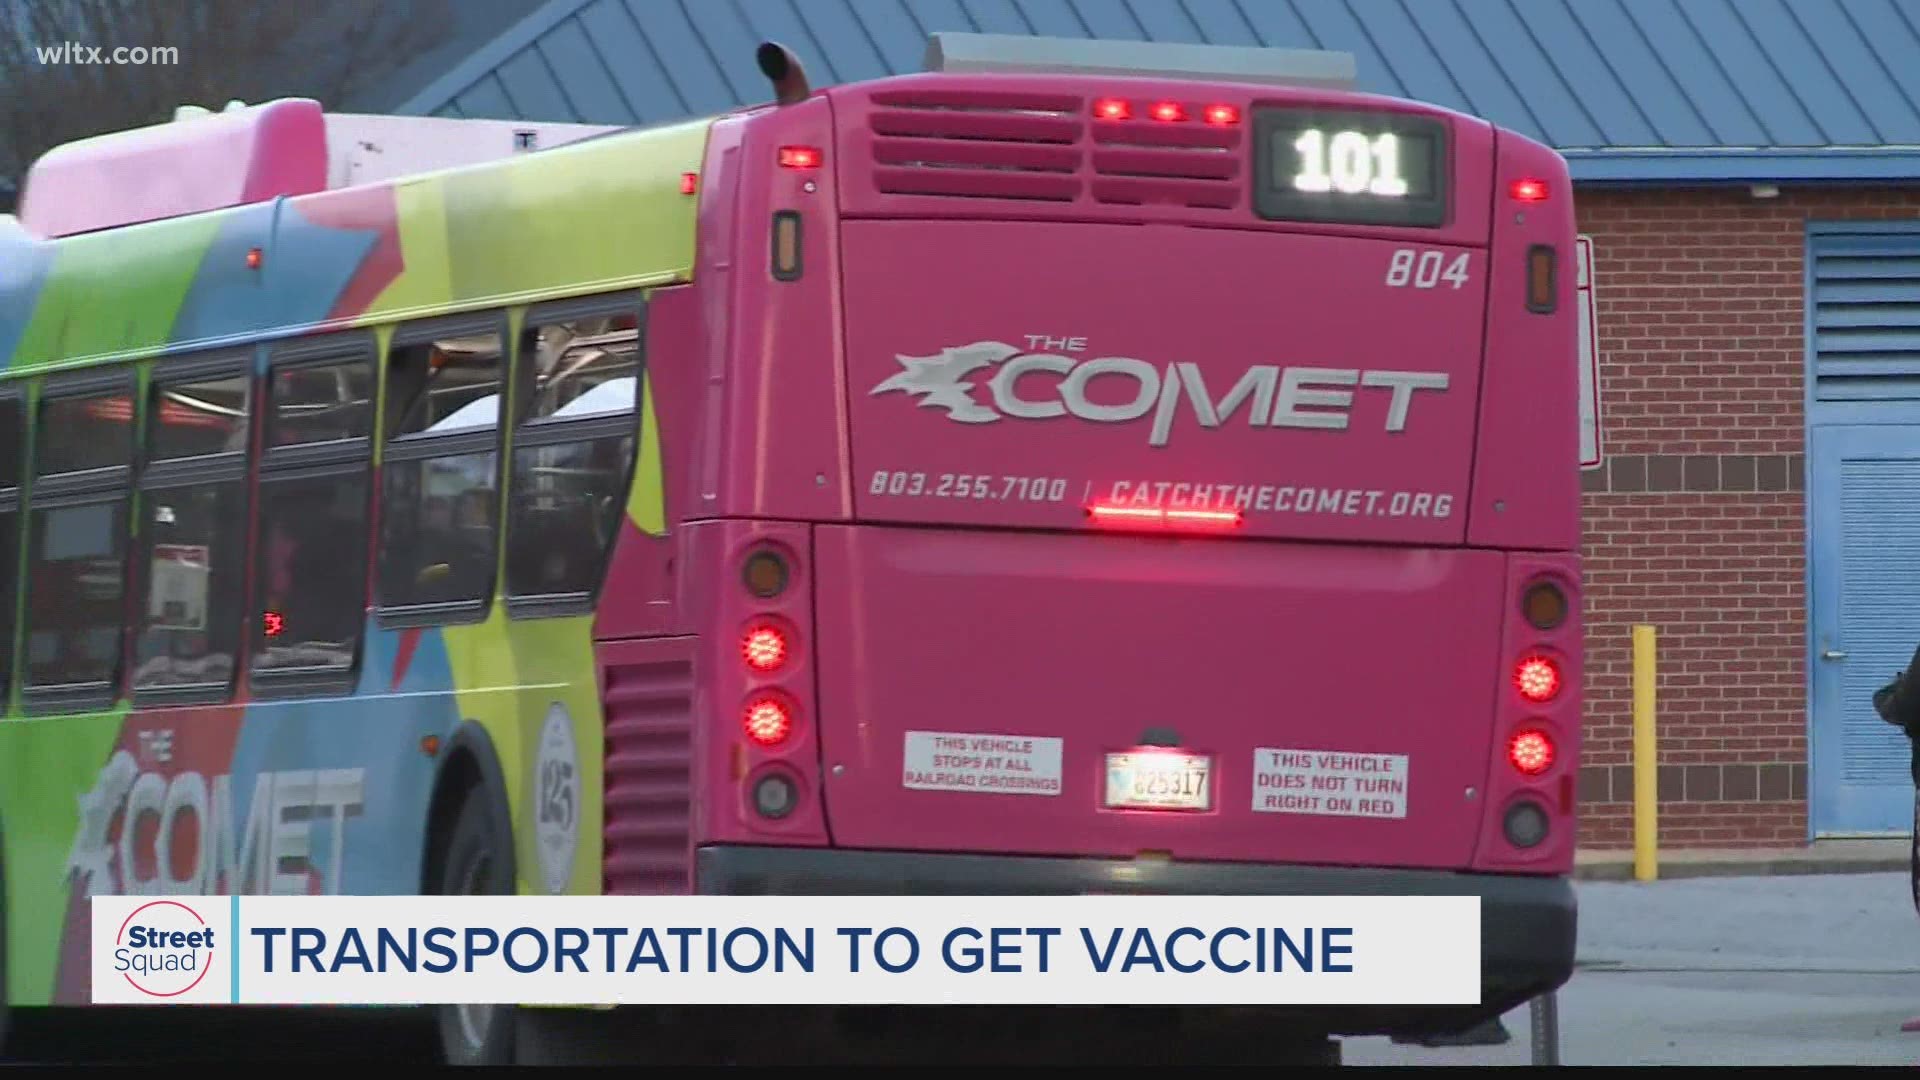 The infrastructure is in place, but The COMET is working to make sure you have all of the info you need to use their services to get vaccinated.